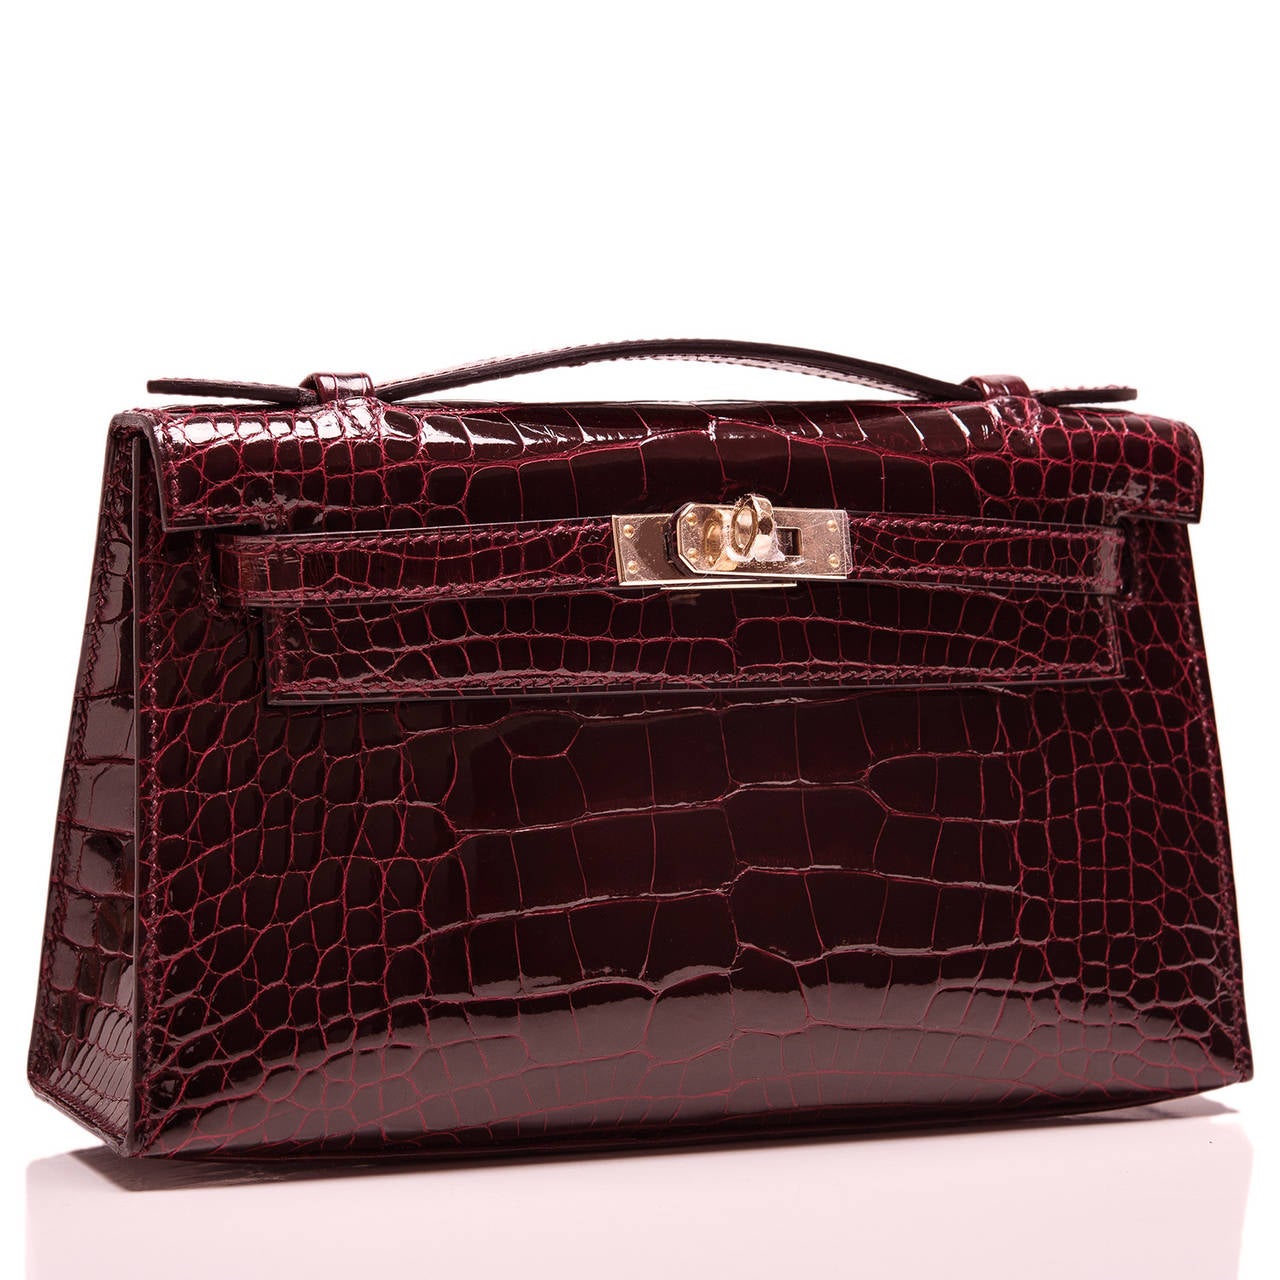 Hermes Bordeaux Shiny Alligator Kelly Pochette clutch with permabrass hardware.

This Hermes Kelly Pochette features tonal stitching, a front flap with two straps, toggle closure and single flat handle. The interior is lined in Bordeaux chevre and